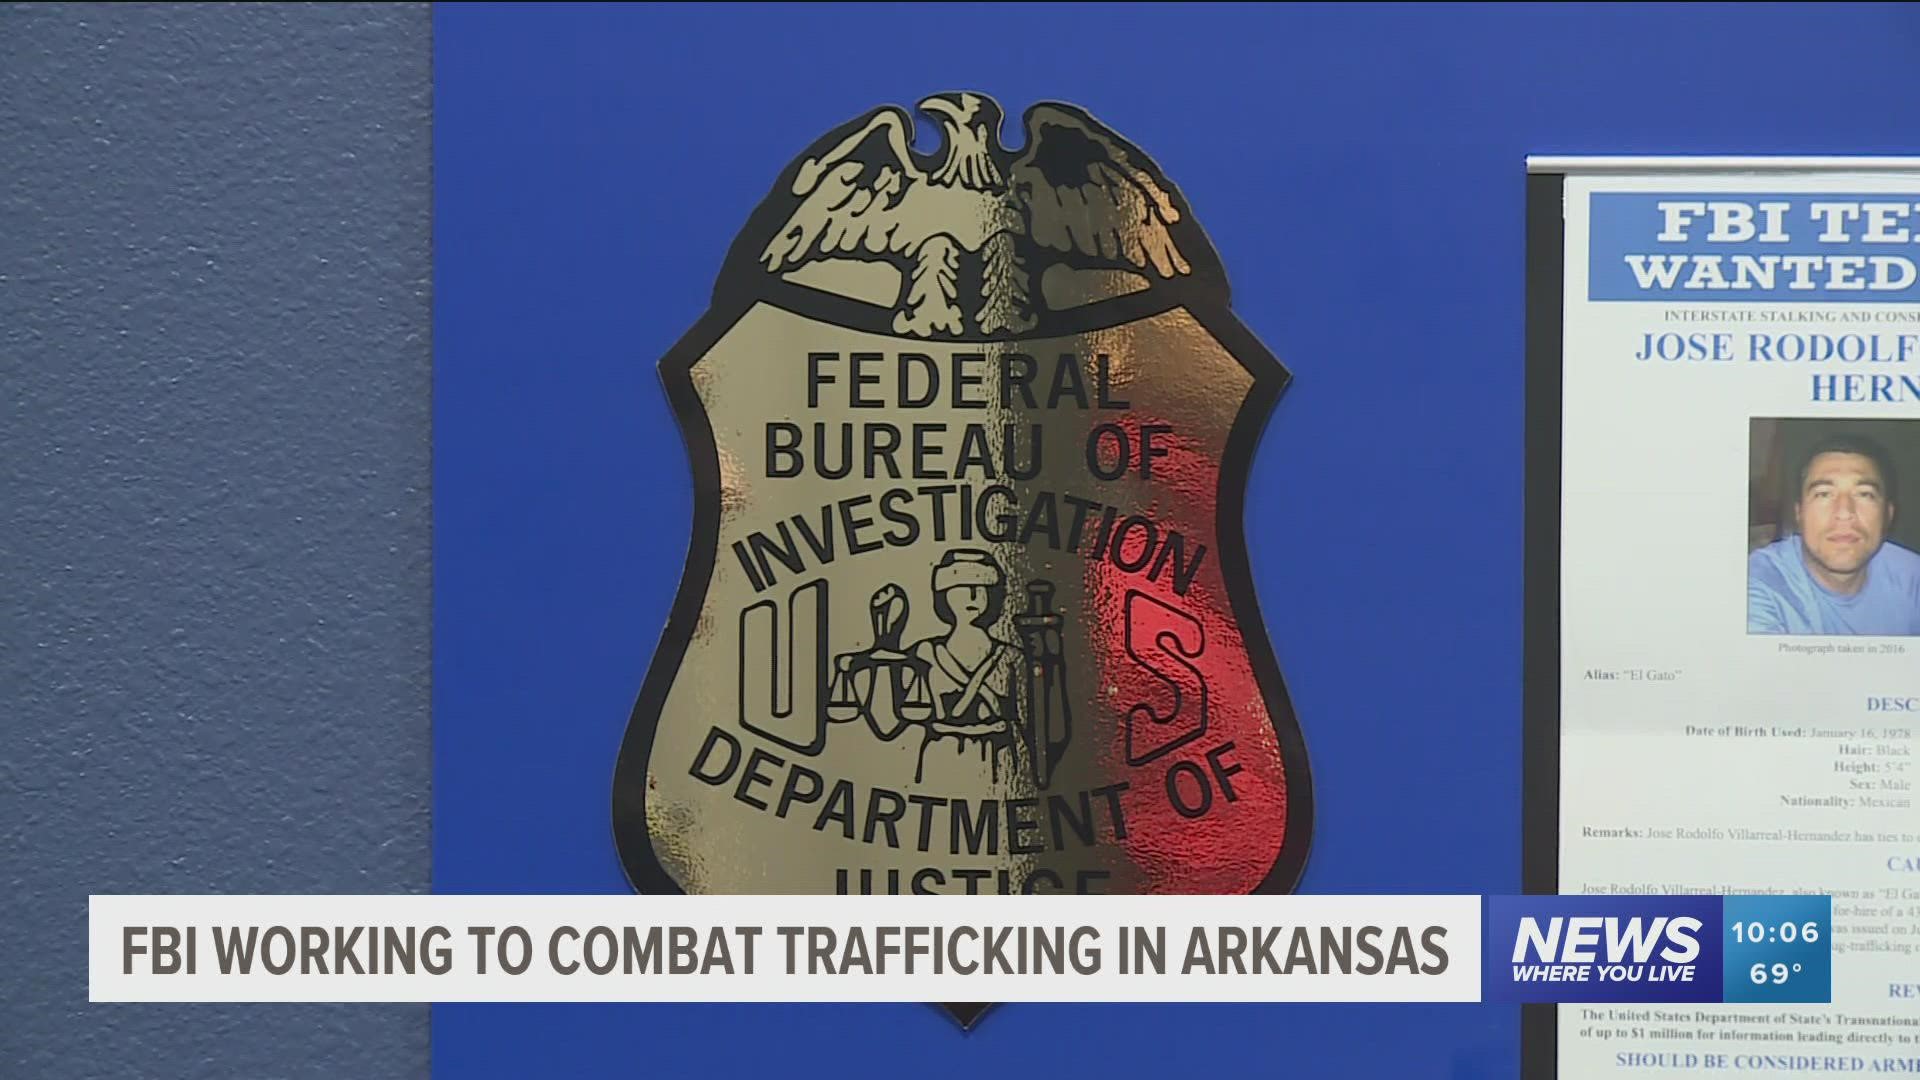 The FBI says the main way children are brought into sex trafficking is through the internet.